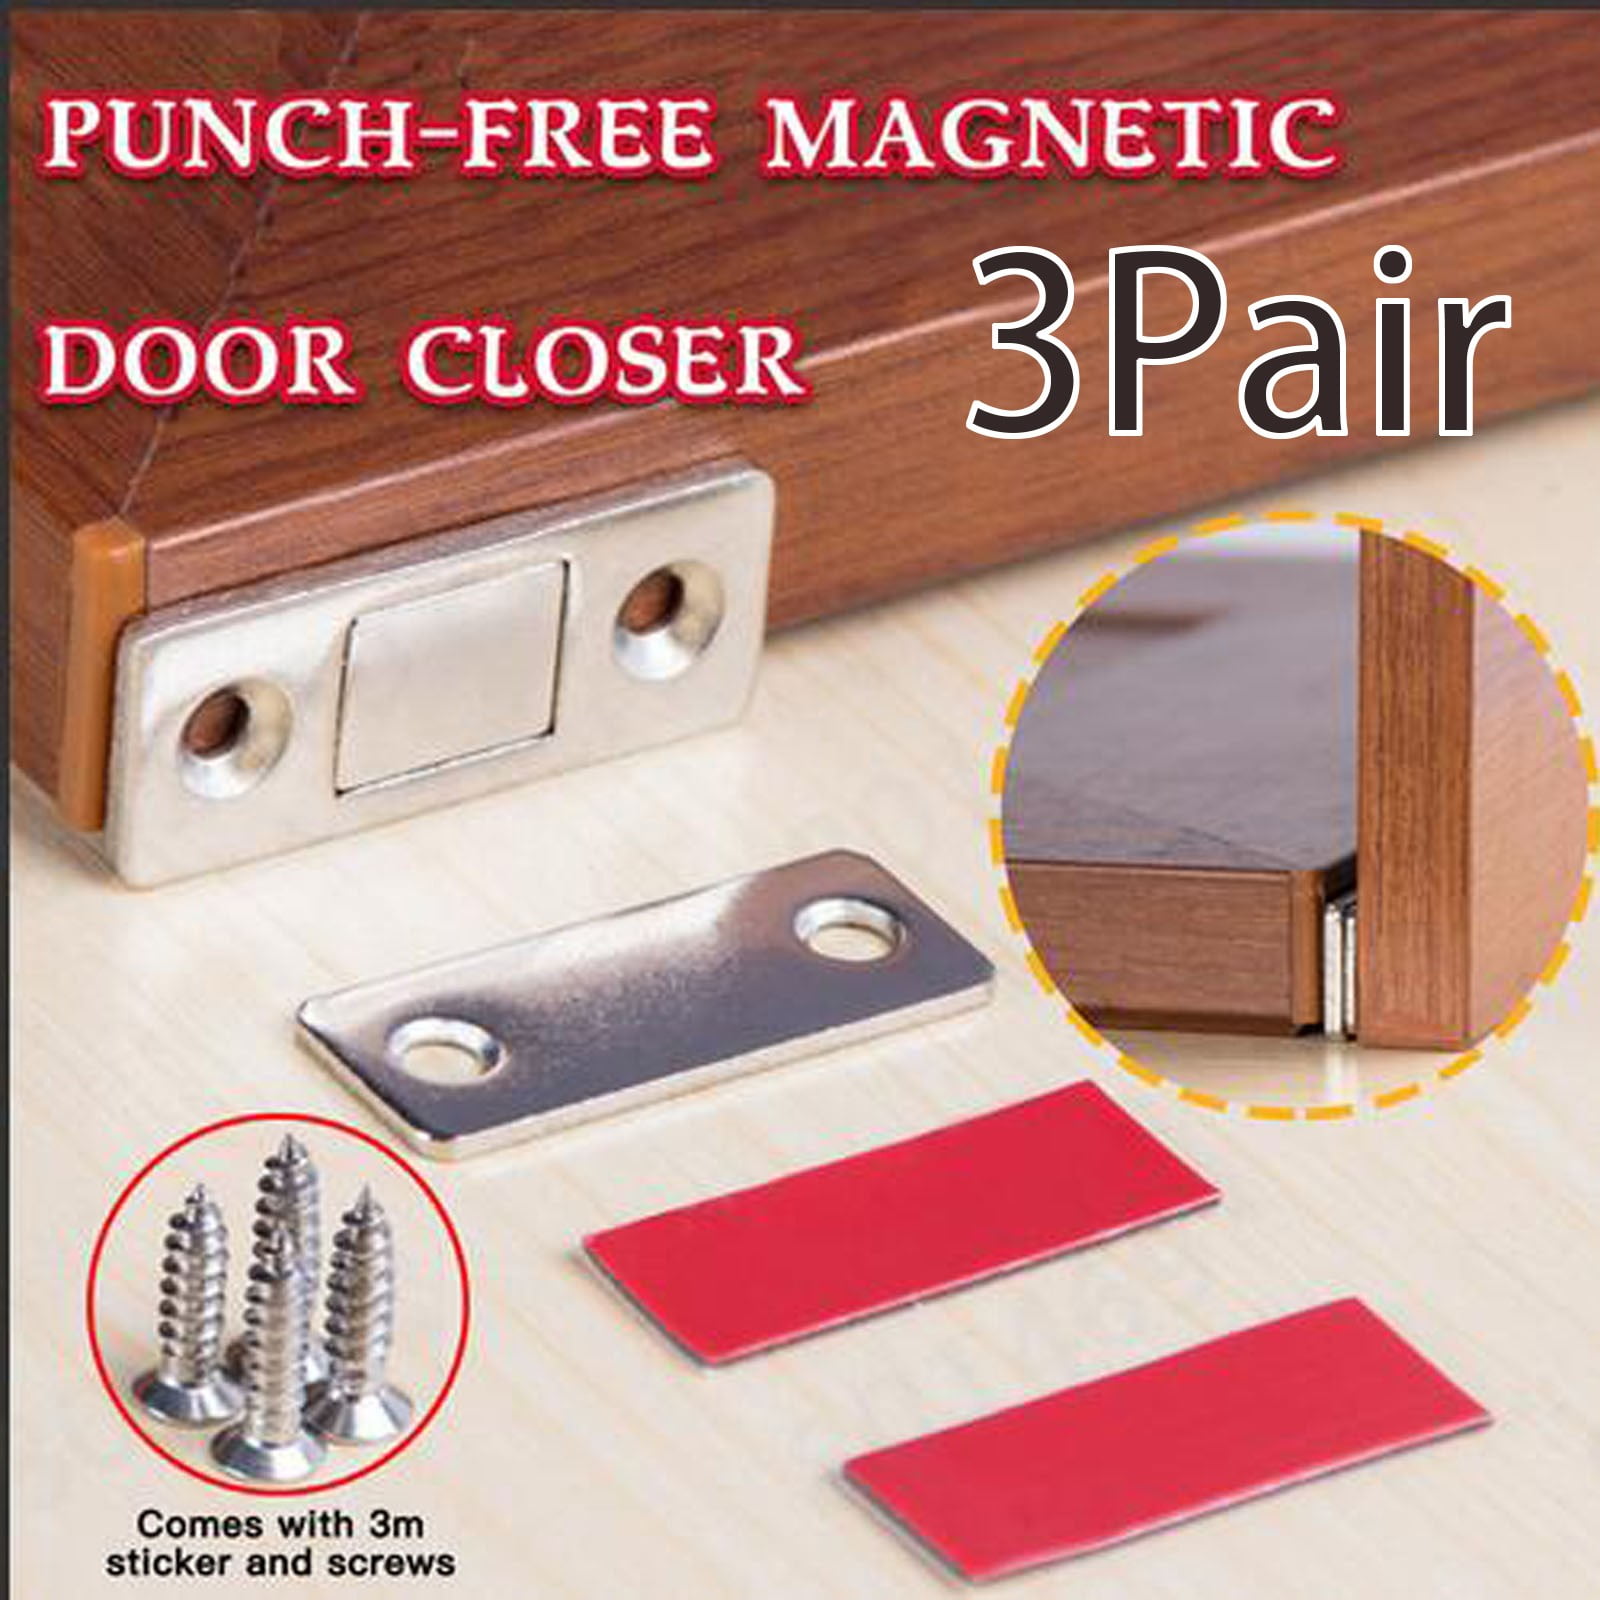 10 Pack Punch-Free Magnetic Door Closer,Ultra Thin Invisible Magnetic Cabinet Door Catch Adhesive for Kitchen Latch Sliding Door Small Closet Cupboard Wardrobe Drawer Sticky 10 Pack